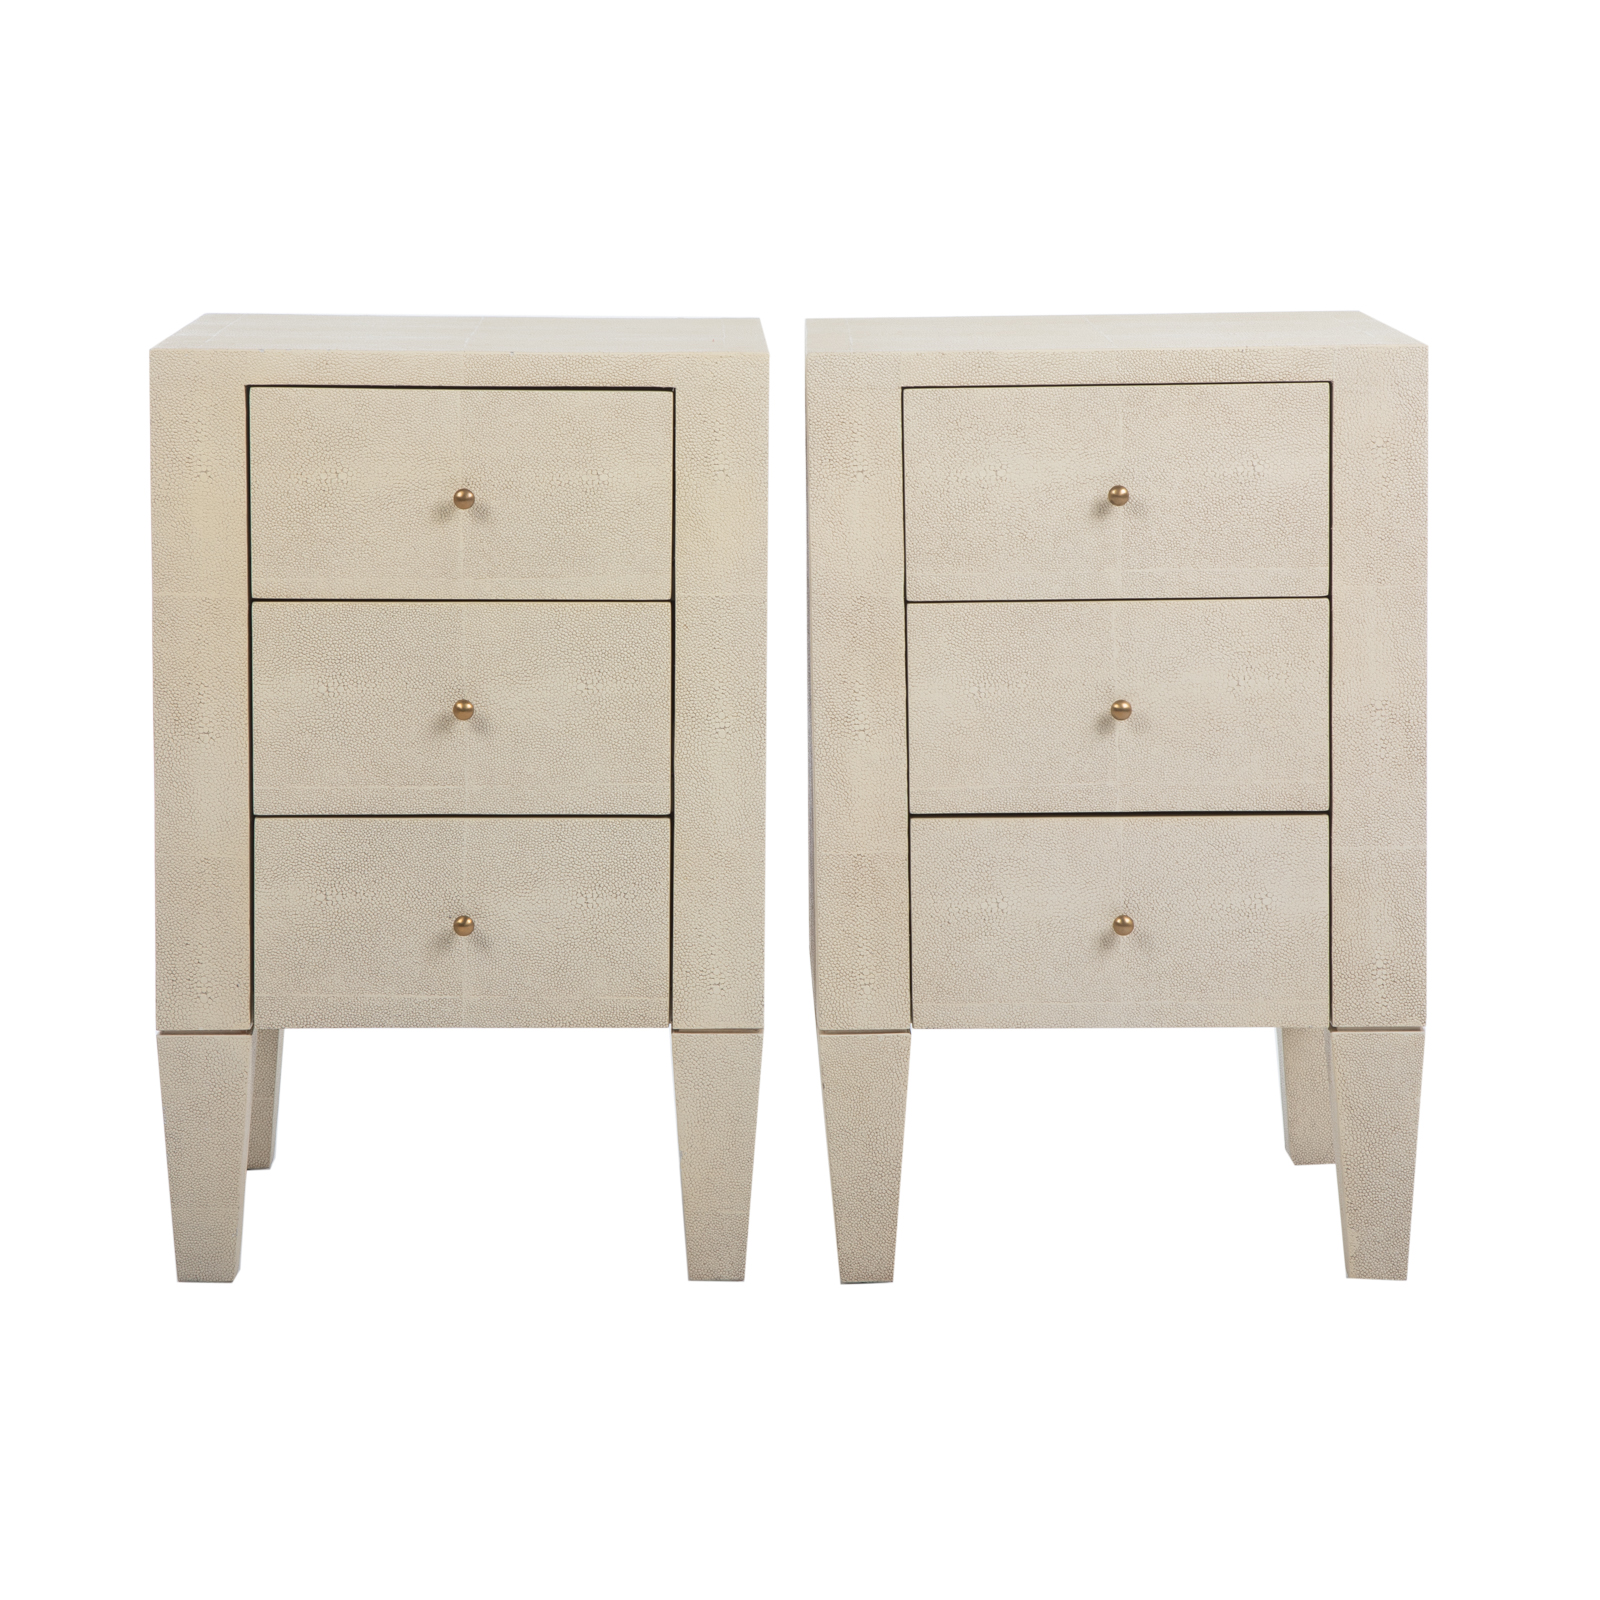 A PAIR OF CONTEMPORARY THREE DRAWER 28761d